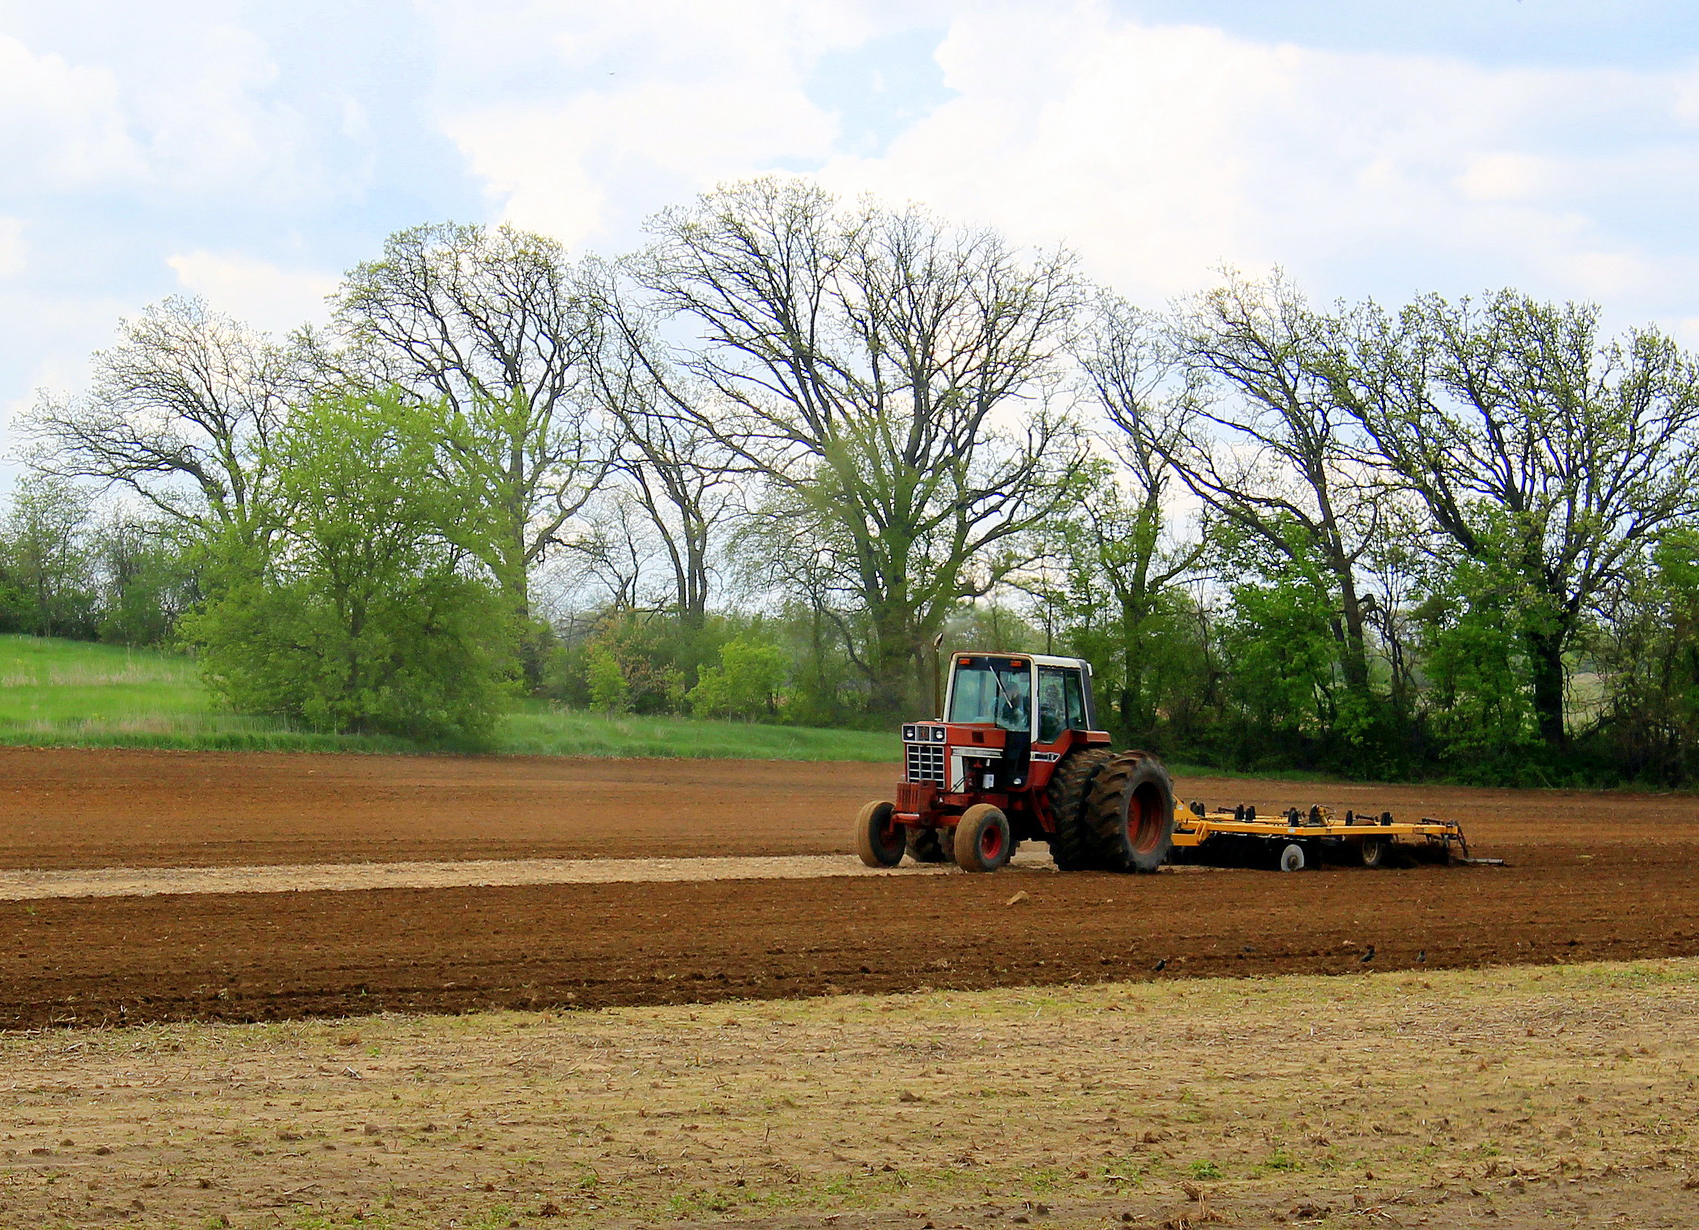 Wisconsin Farmers Planting Ahead Of Schedule Thanks To Favorable Weather